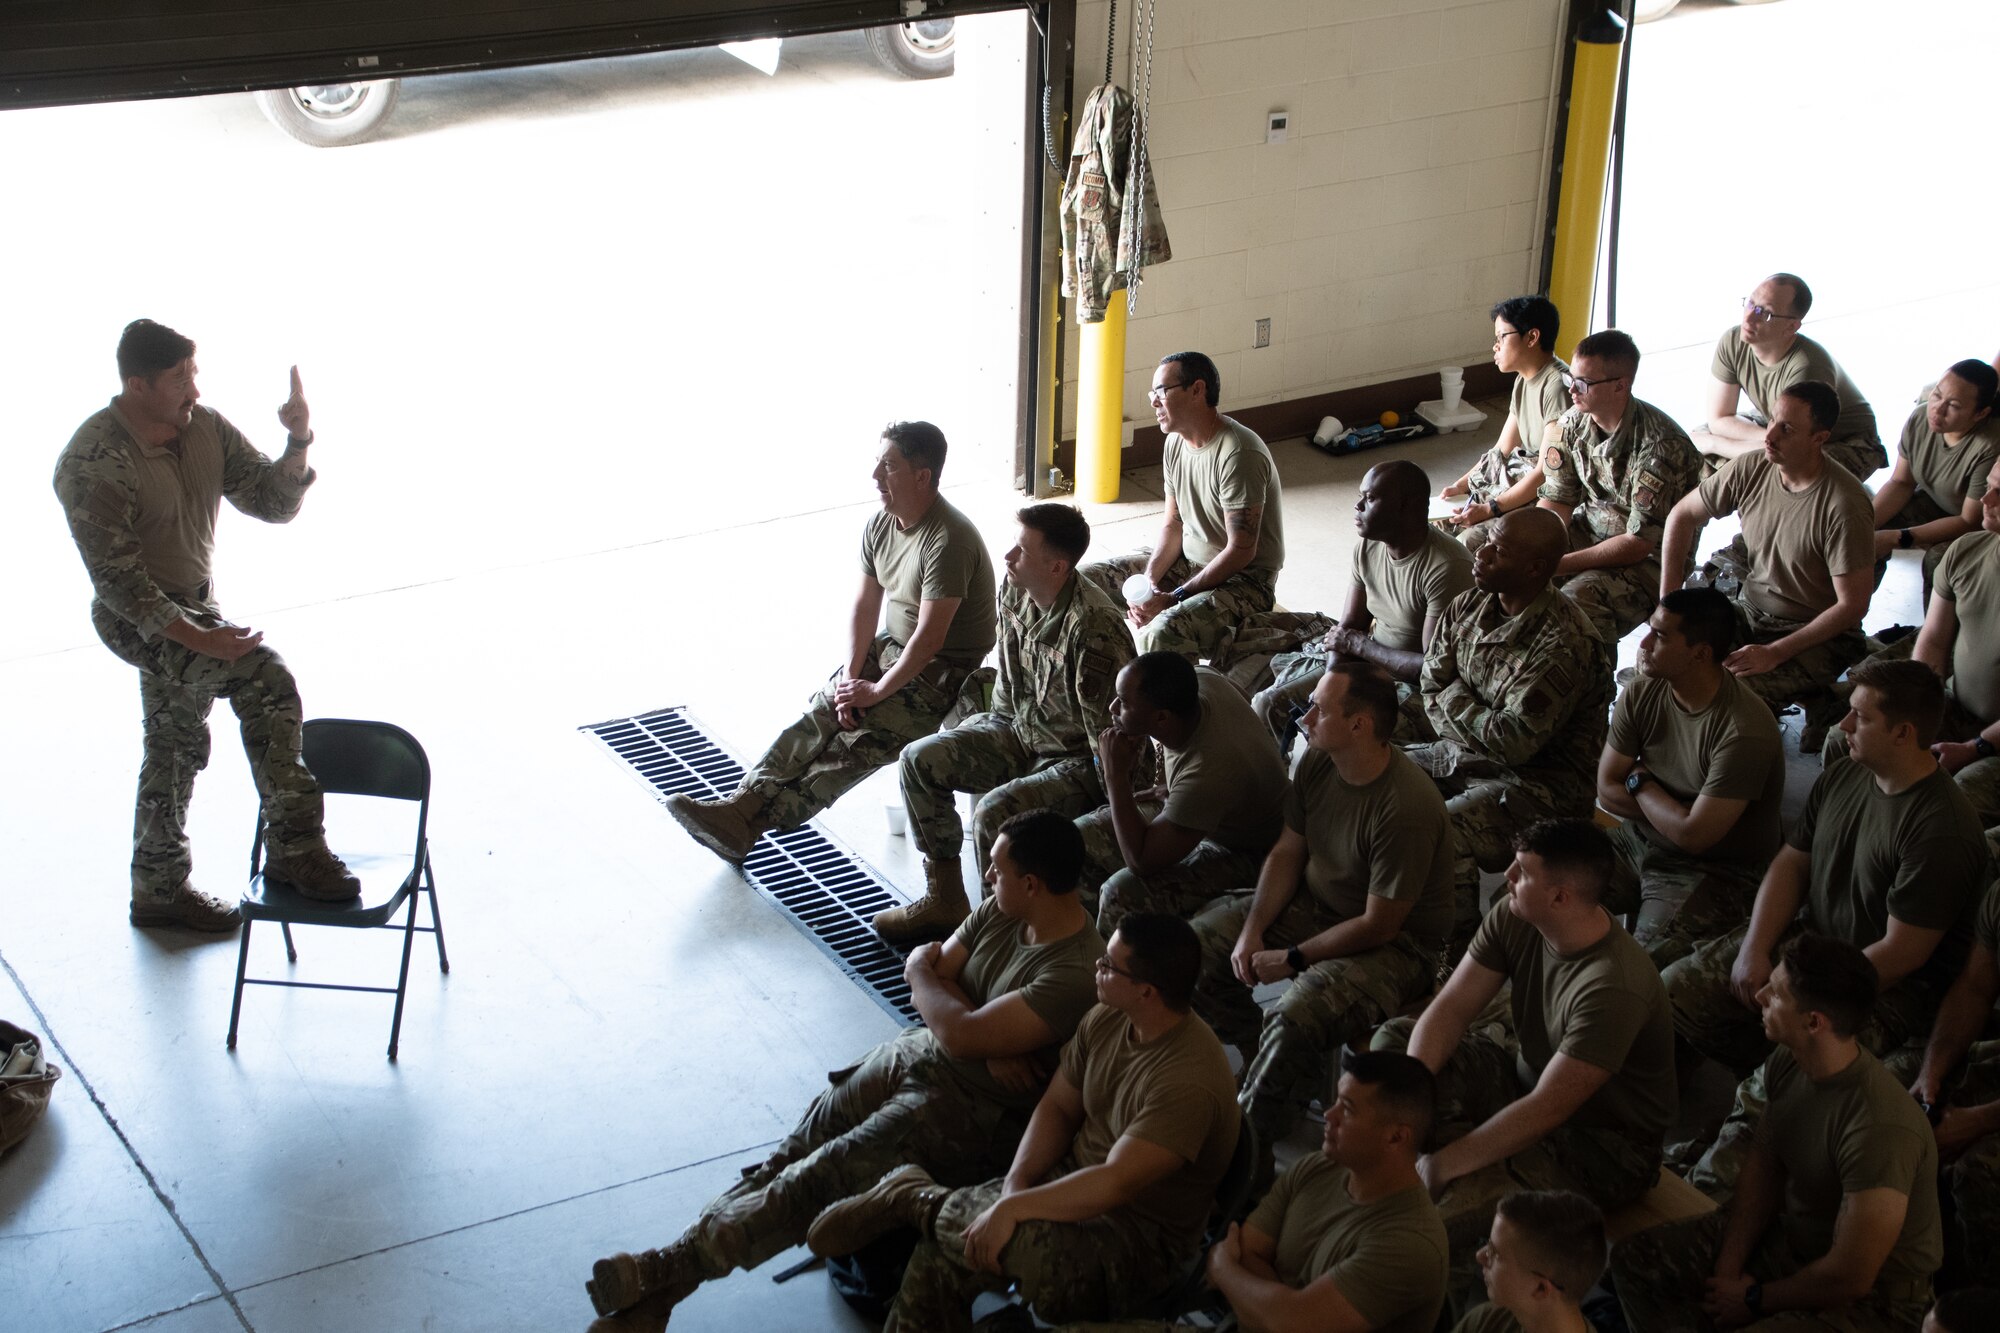 Members with the 221st and 239th Combat Communications Squadrons receive instruction on Tactical Combat Casualty Care from Staff Sgt. Travis Wilson, 159th Fighter Wing, during Exercise BUMBU 22 at Camp Shelby, Mississippi, June 9, 2022. BUMBU 22 is a training exercise involving five geographically-separated combat communications squadrons from across the 254th Combat Communications Group. (U.S. Air National Guard photo by Airman 1st Class Kelly Ferguson)